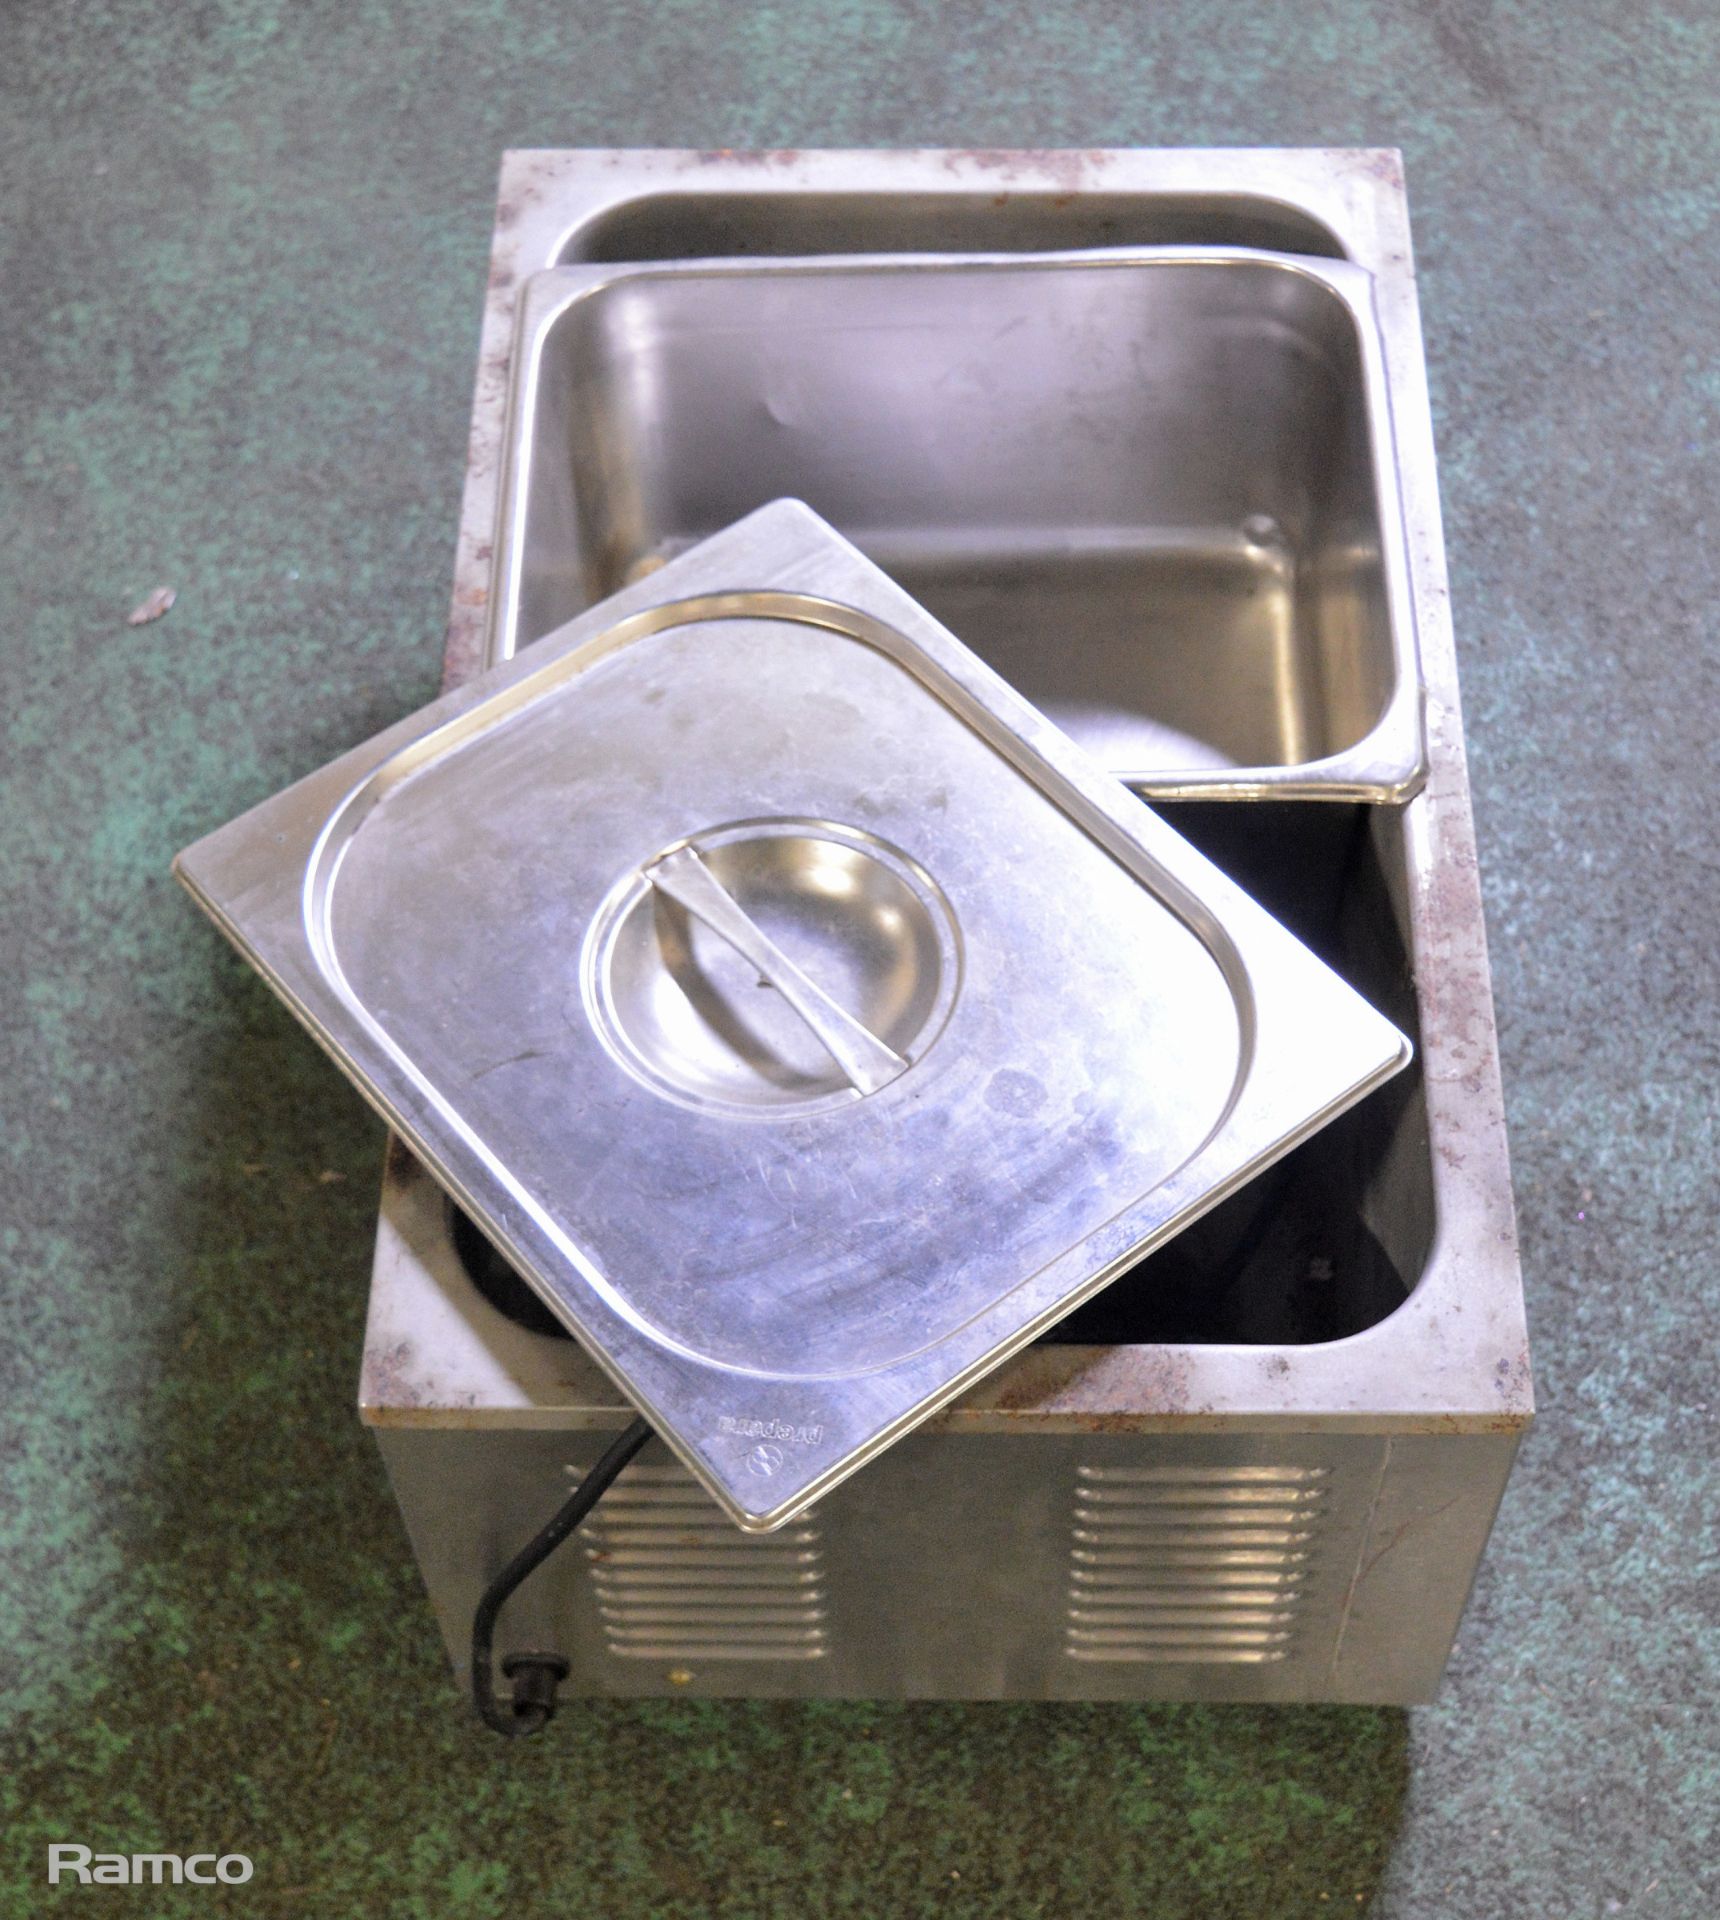 Chefmaster HEA758 Table Top 1/1 GN Bain Marie with Drain Tap - Image 5 of 5